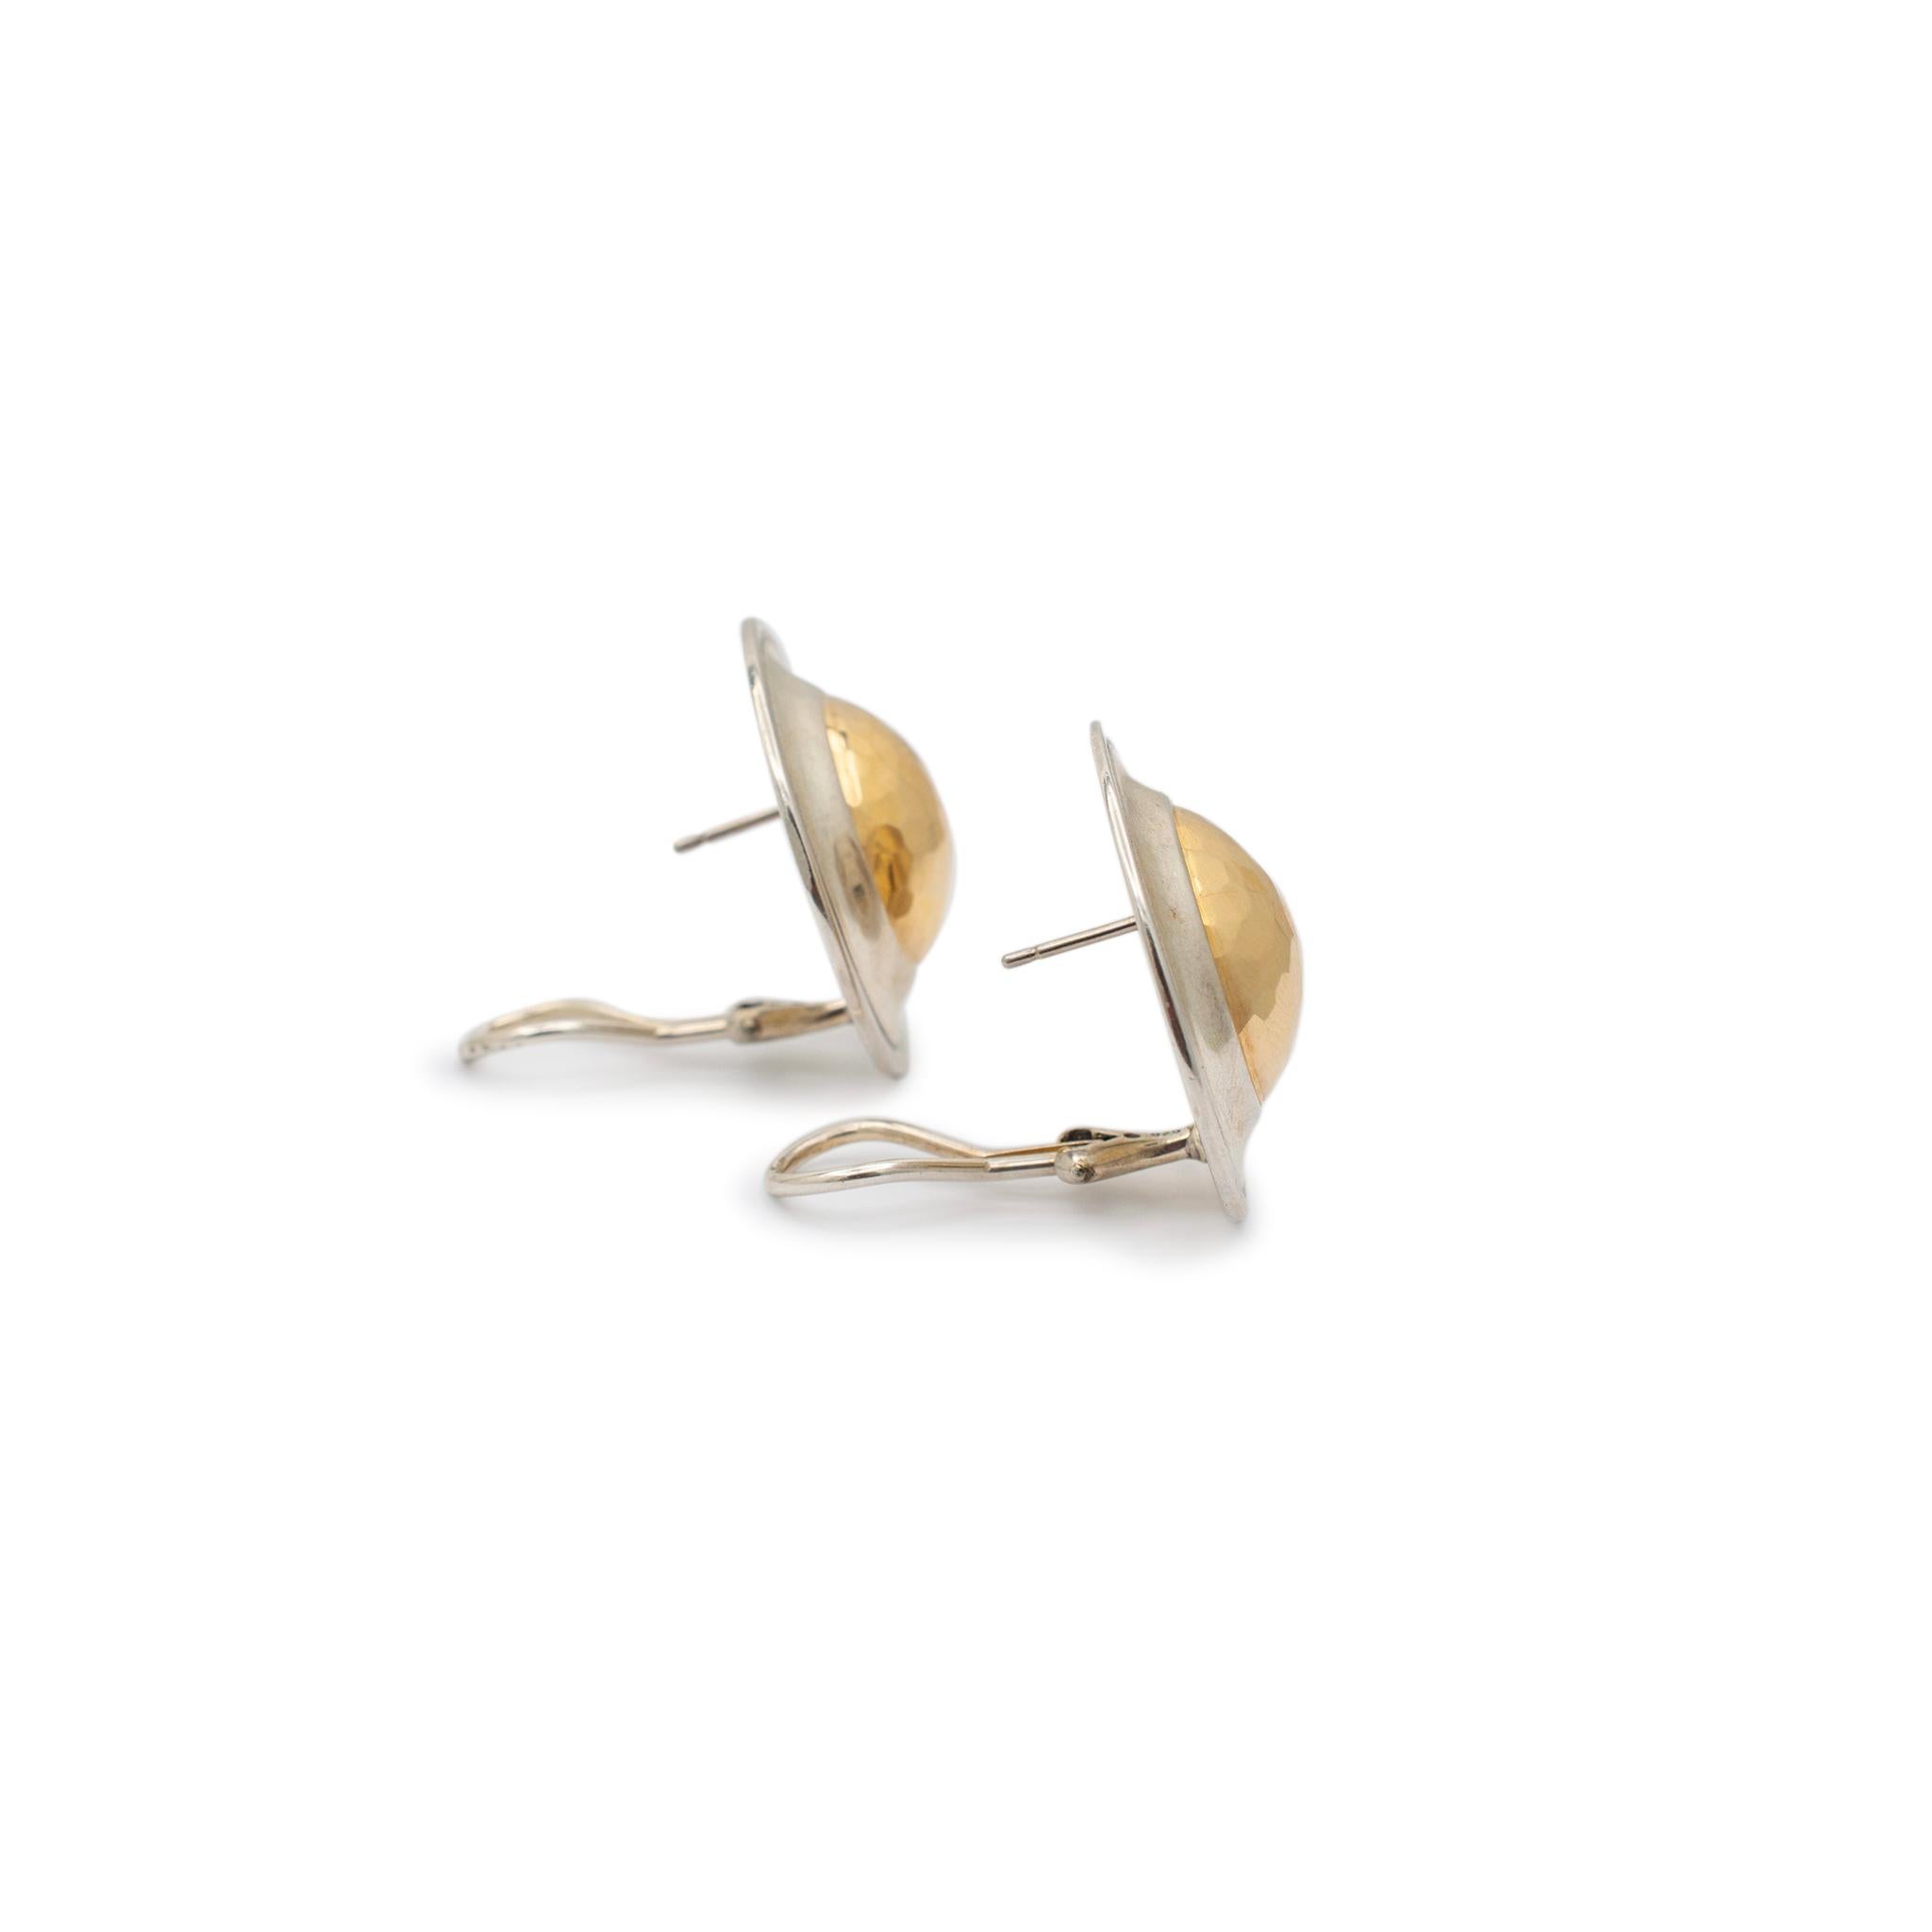 Brand: James Avery

Gender: Ladies

Metal Type: 14 Karat Yellow Gold & 925 Sterling Silver

Diameter: 28.00 mm

Width: 28.00 mm

Weight: 20.20 grams

One pair of ladies matte finished 14K yellow gold and silver earrings with omega-wire backs.